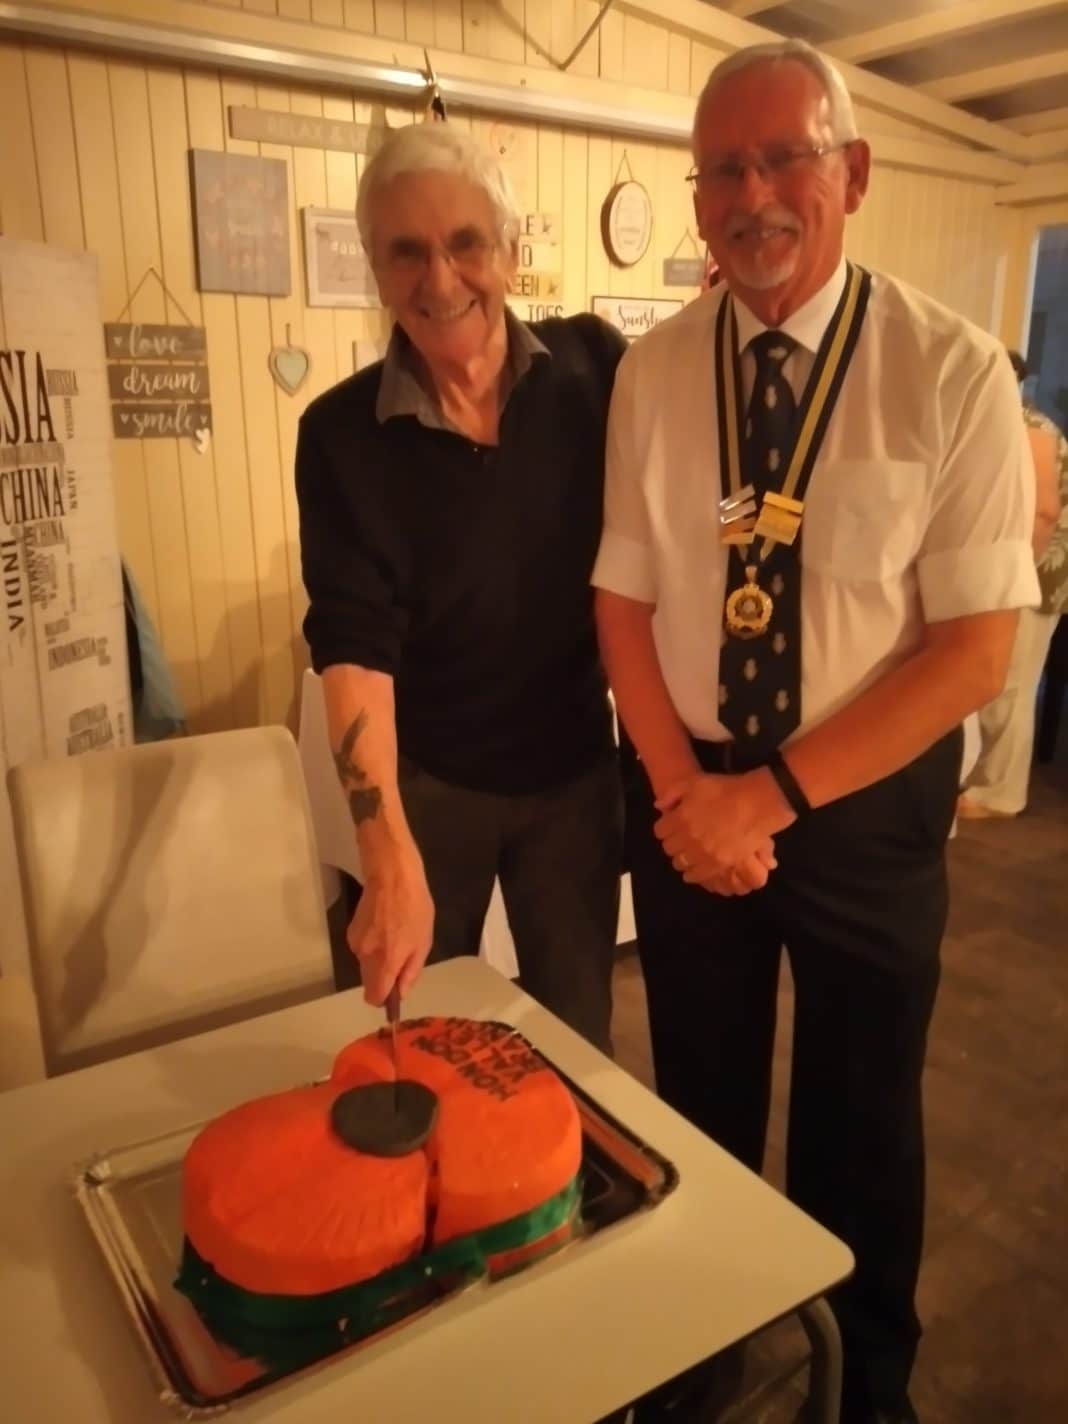 Peter Broadbent – founding member and past President – cutting the cake, with Chairman Joe Logan.